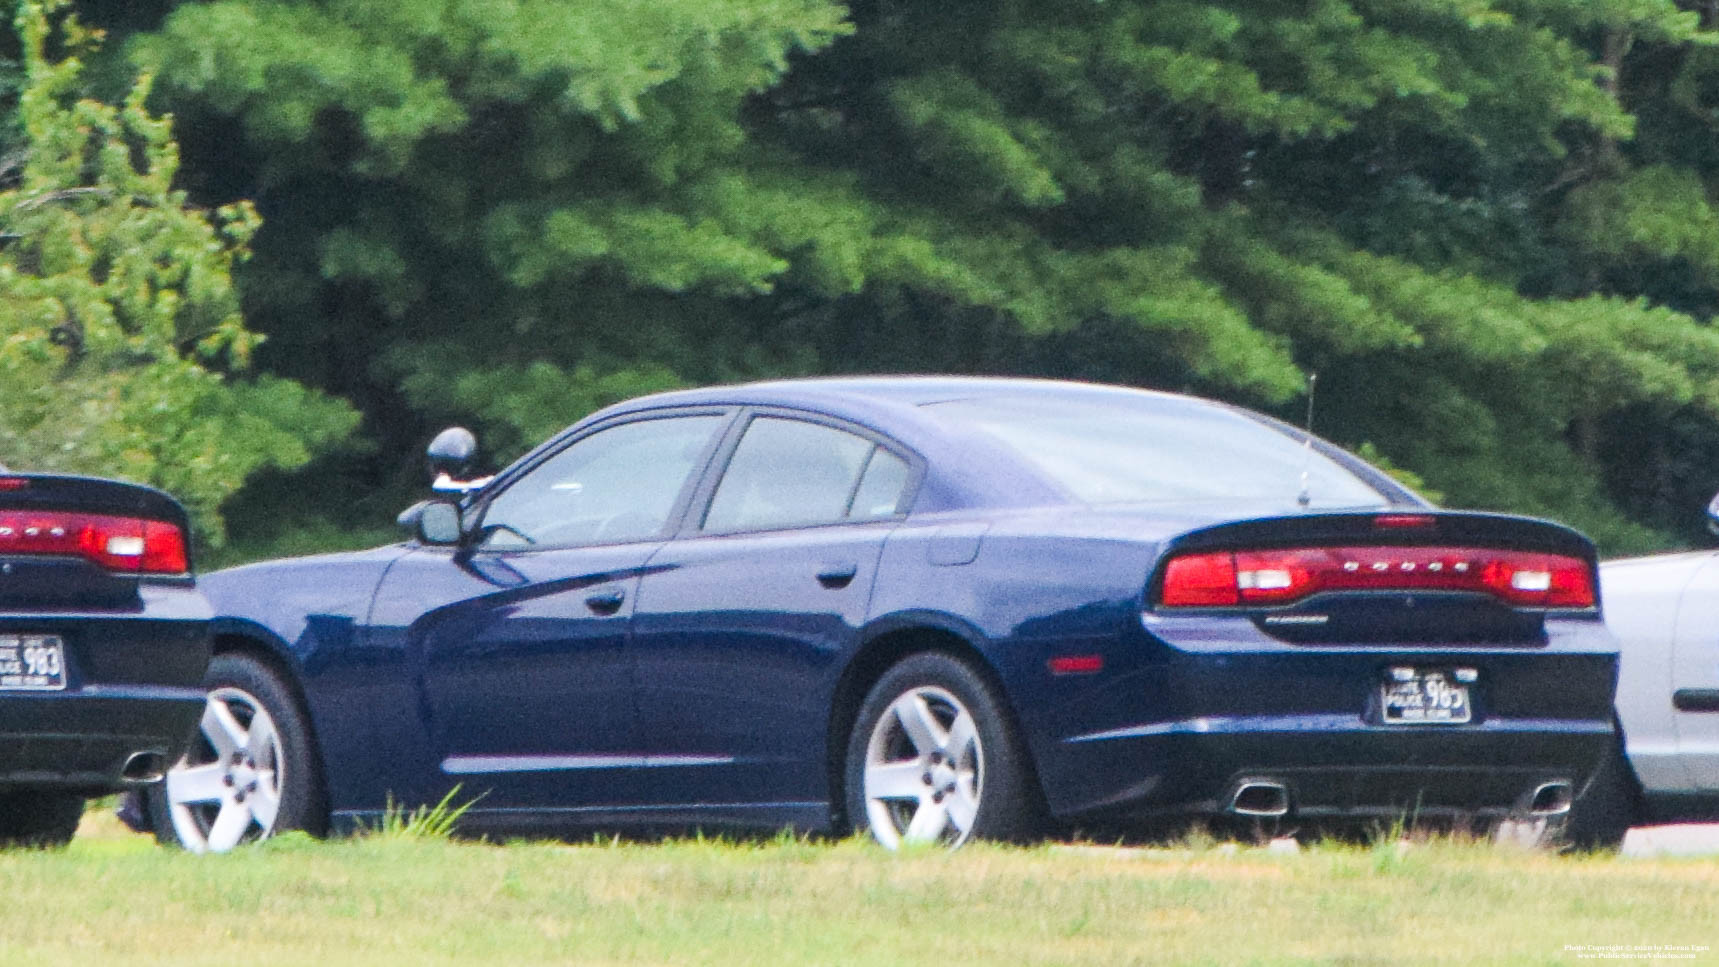 A photo  of Rhode Island State Police
            Cruiser 985, a 2013 Dodge Charger             taken by Kieran Egan